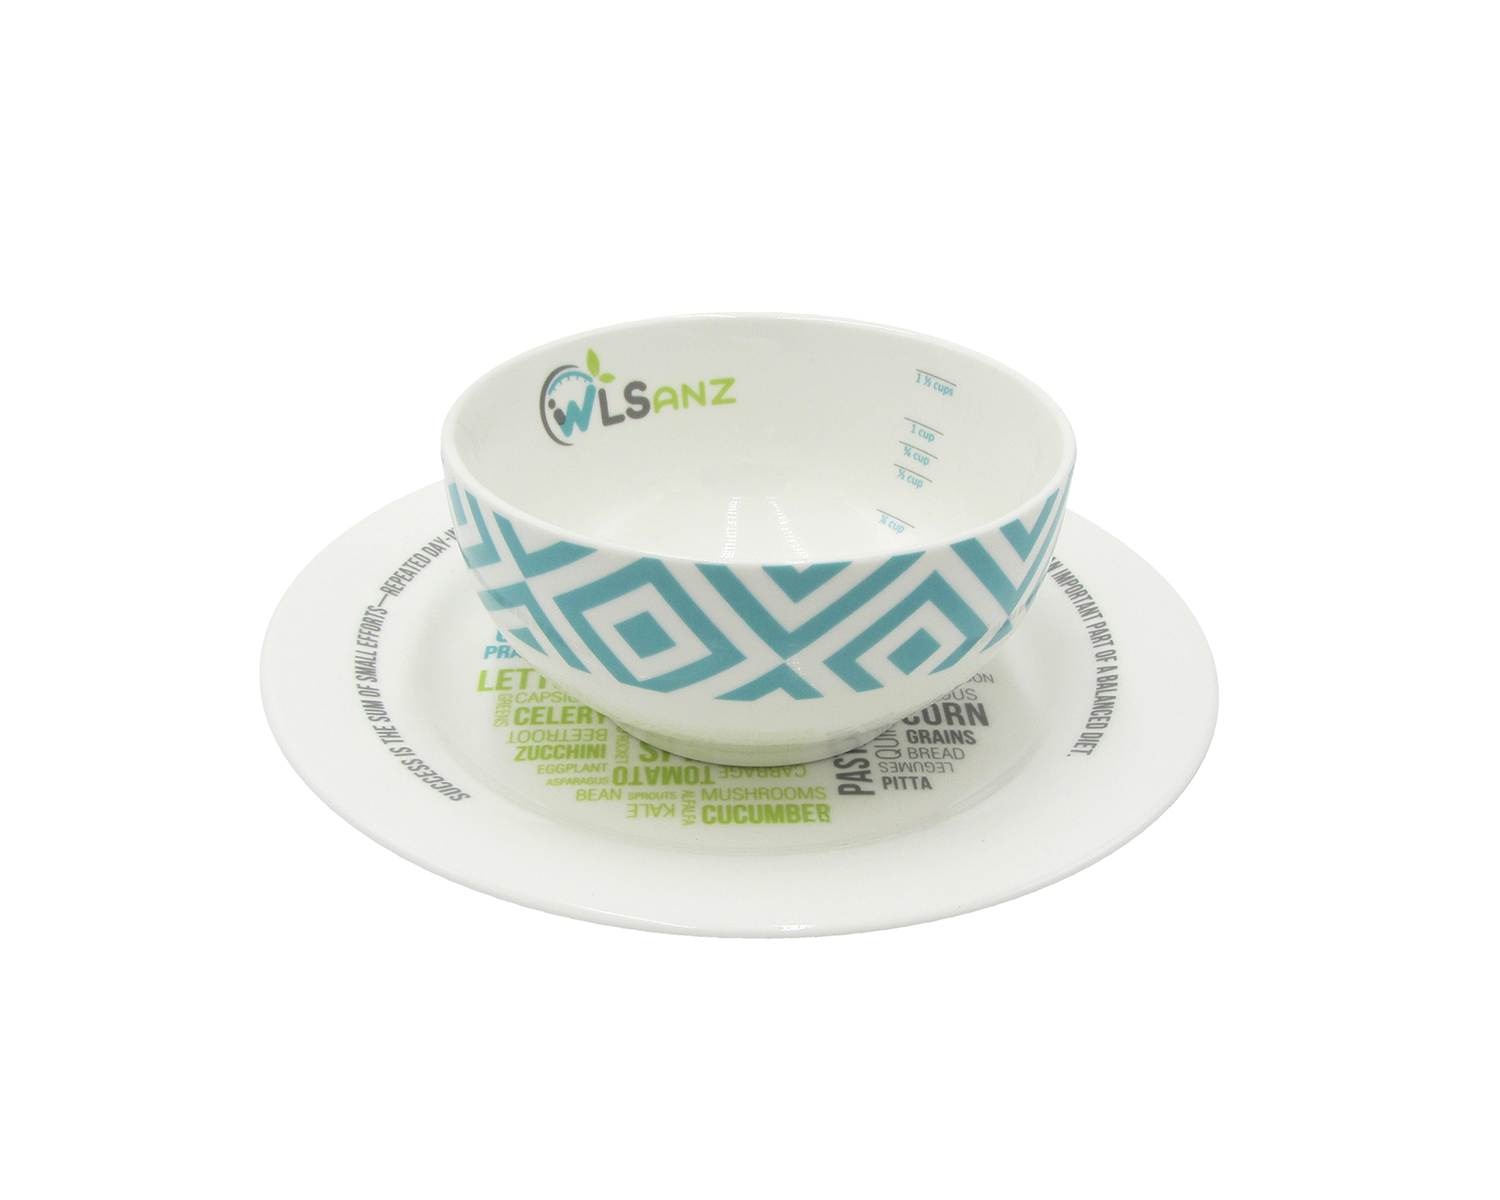 WLSANZ Porcelain Portion Control Plate with Bowl 